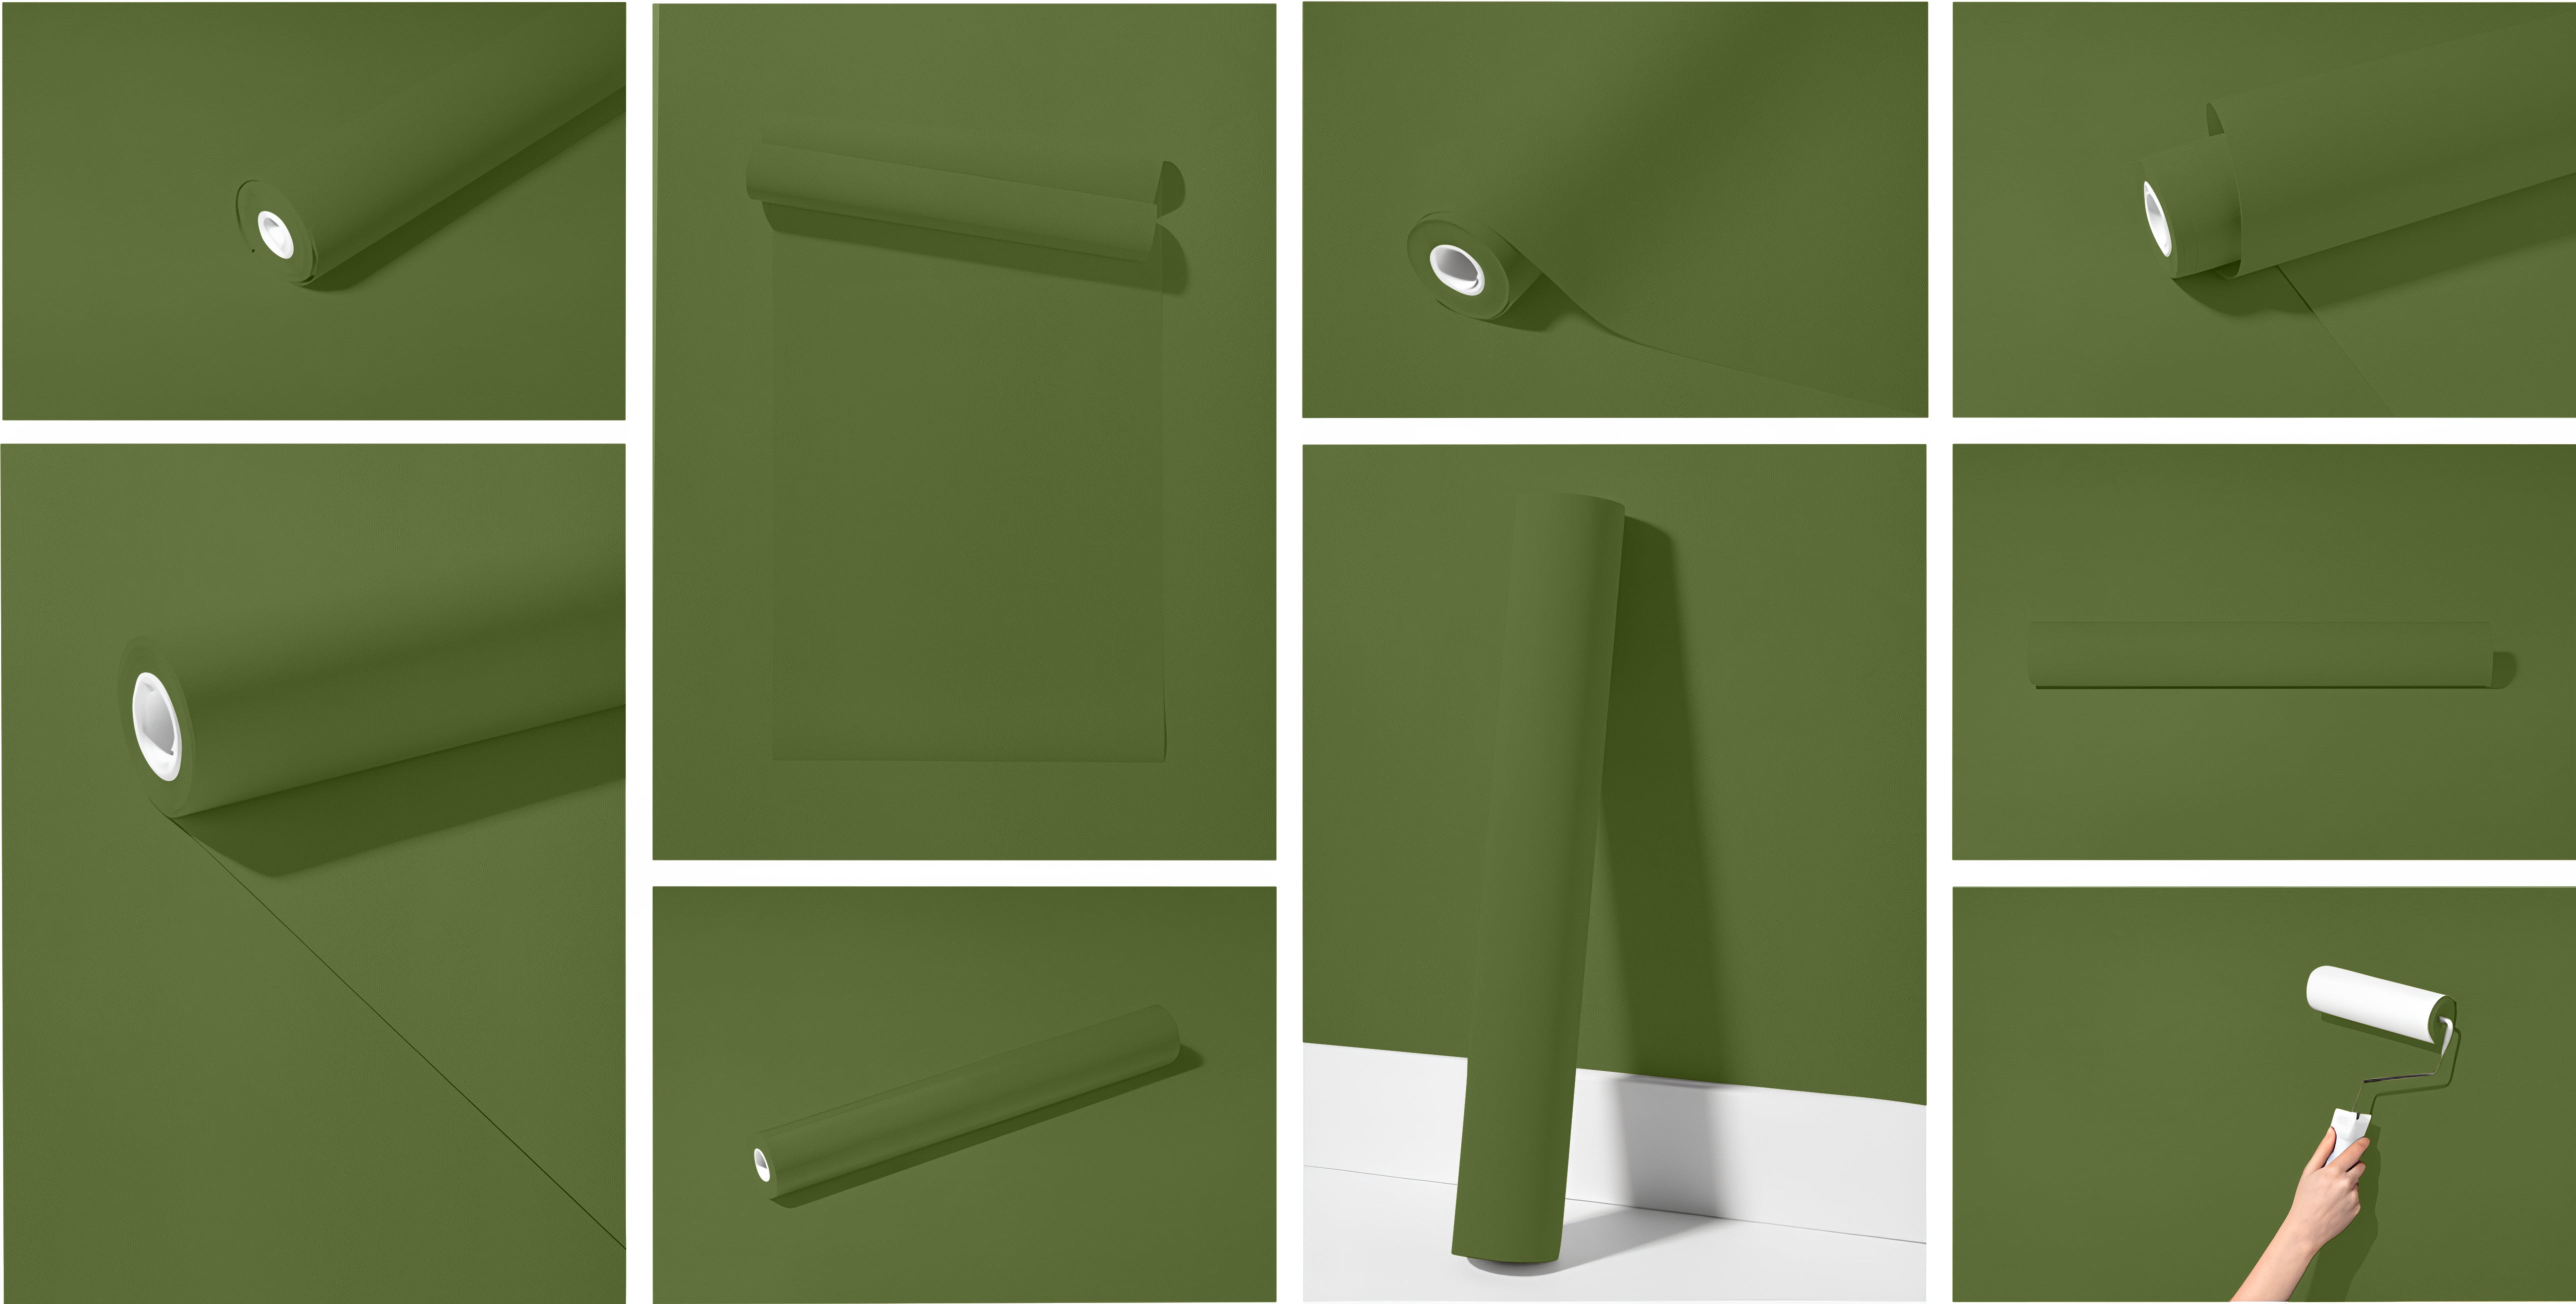 Peel & Stick Removable Re-usable Paint - Color RAL 6025 Fern Green - offRAL™ - RALRAW LLC, USA